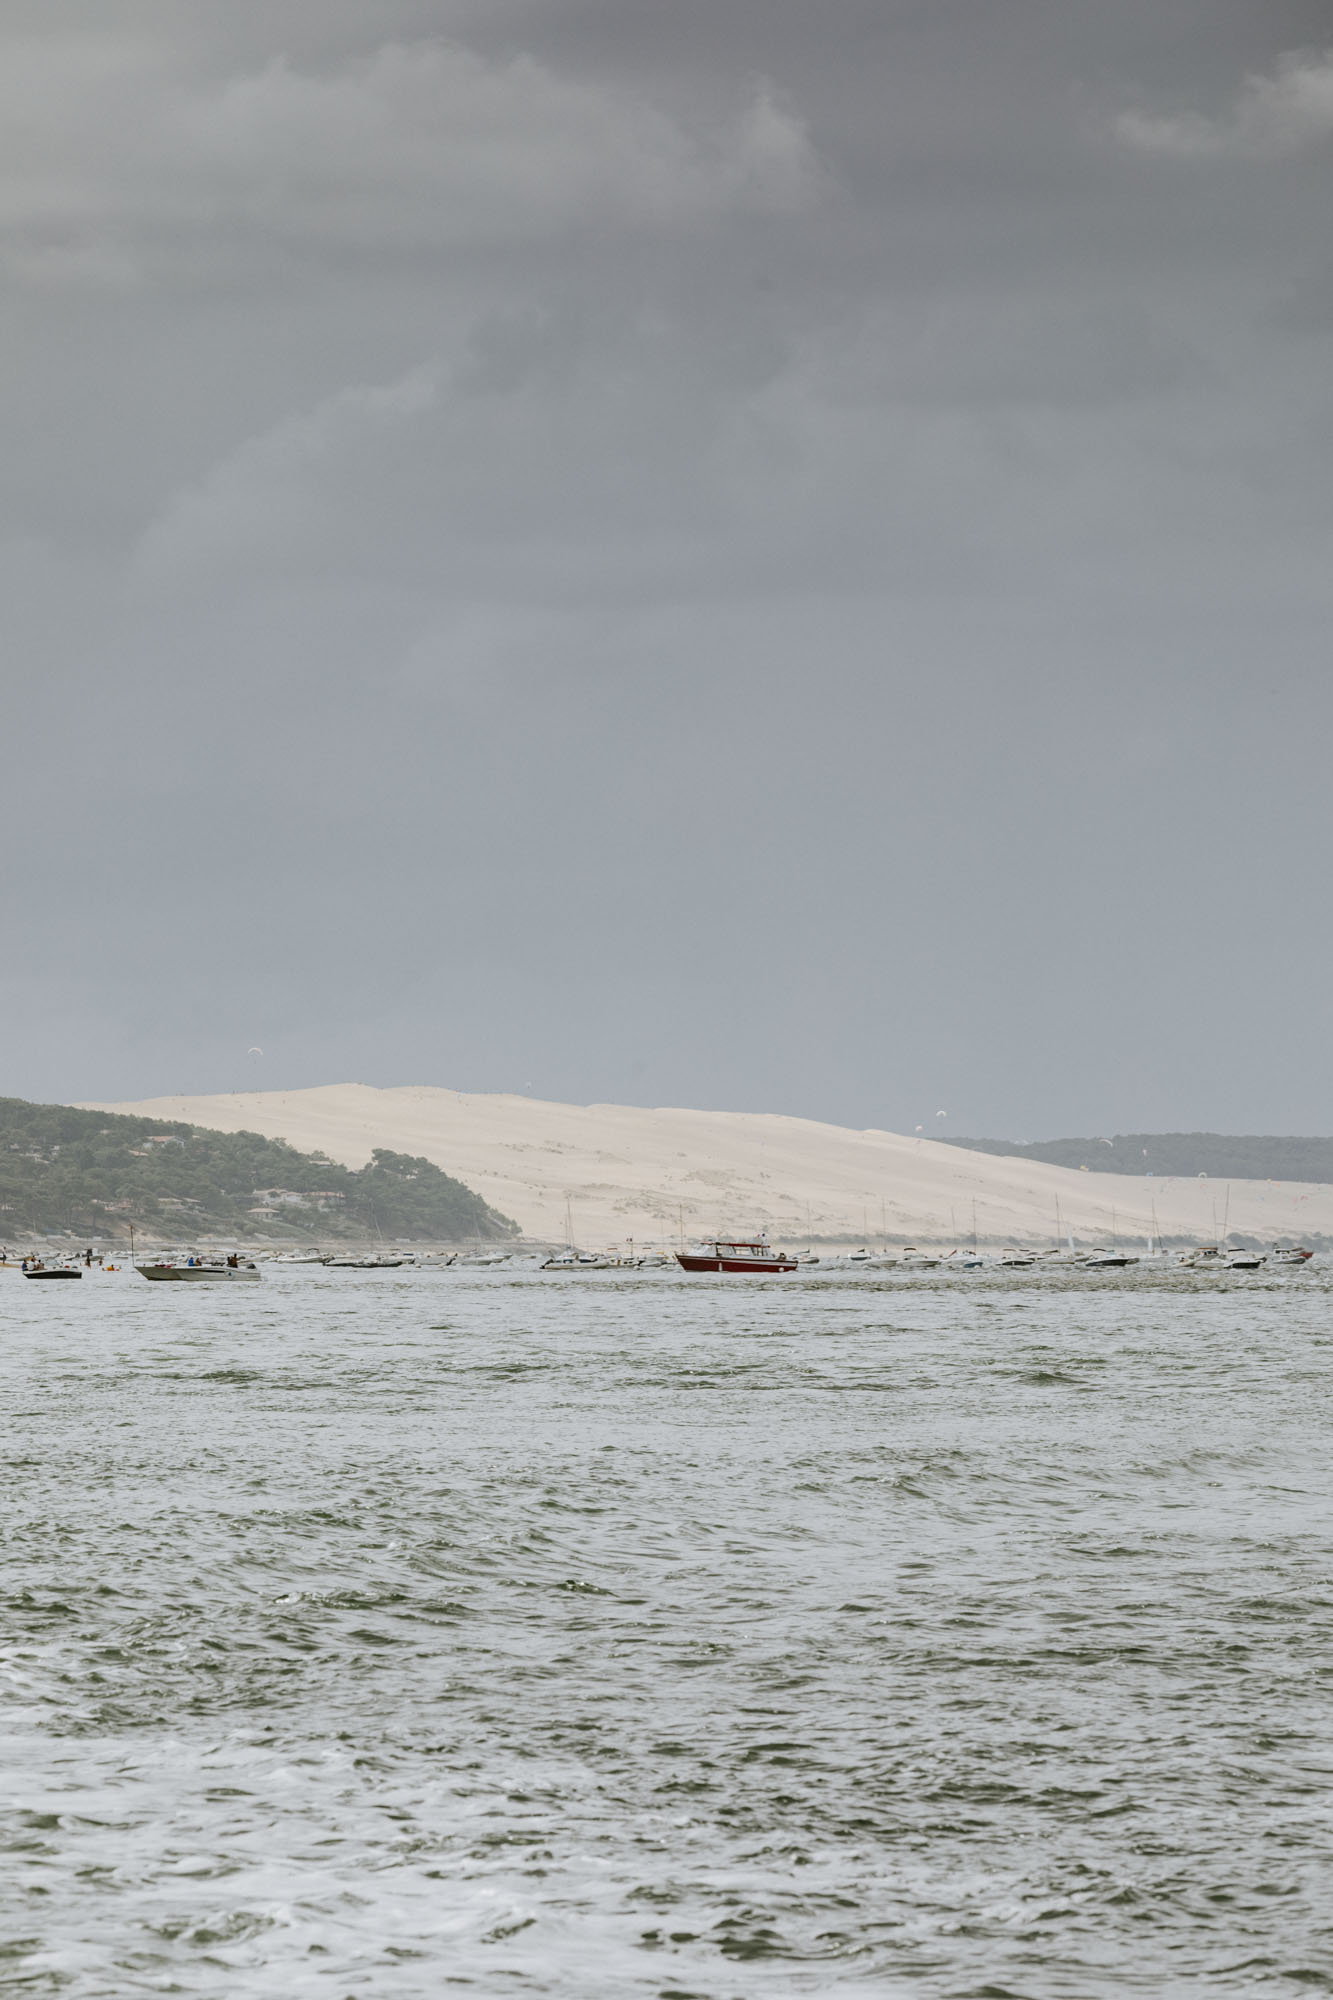 Arcachon wedding photographer: we get treated to a nice view over the Dune of Pyla from the boat crossing the bay